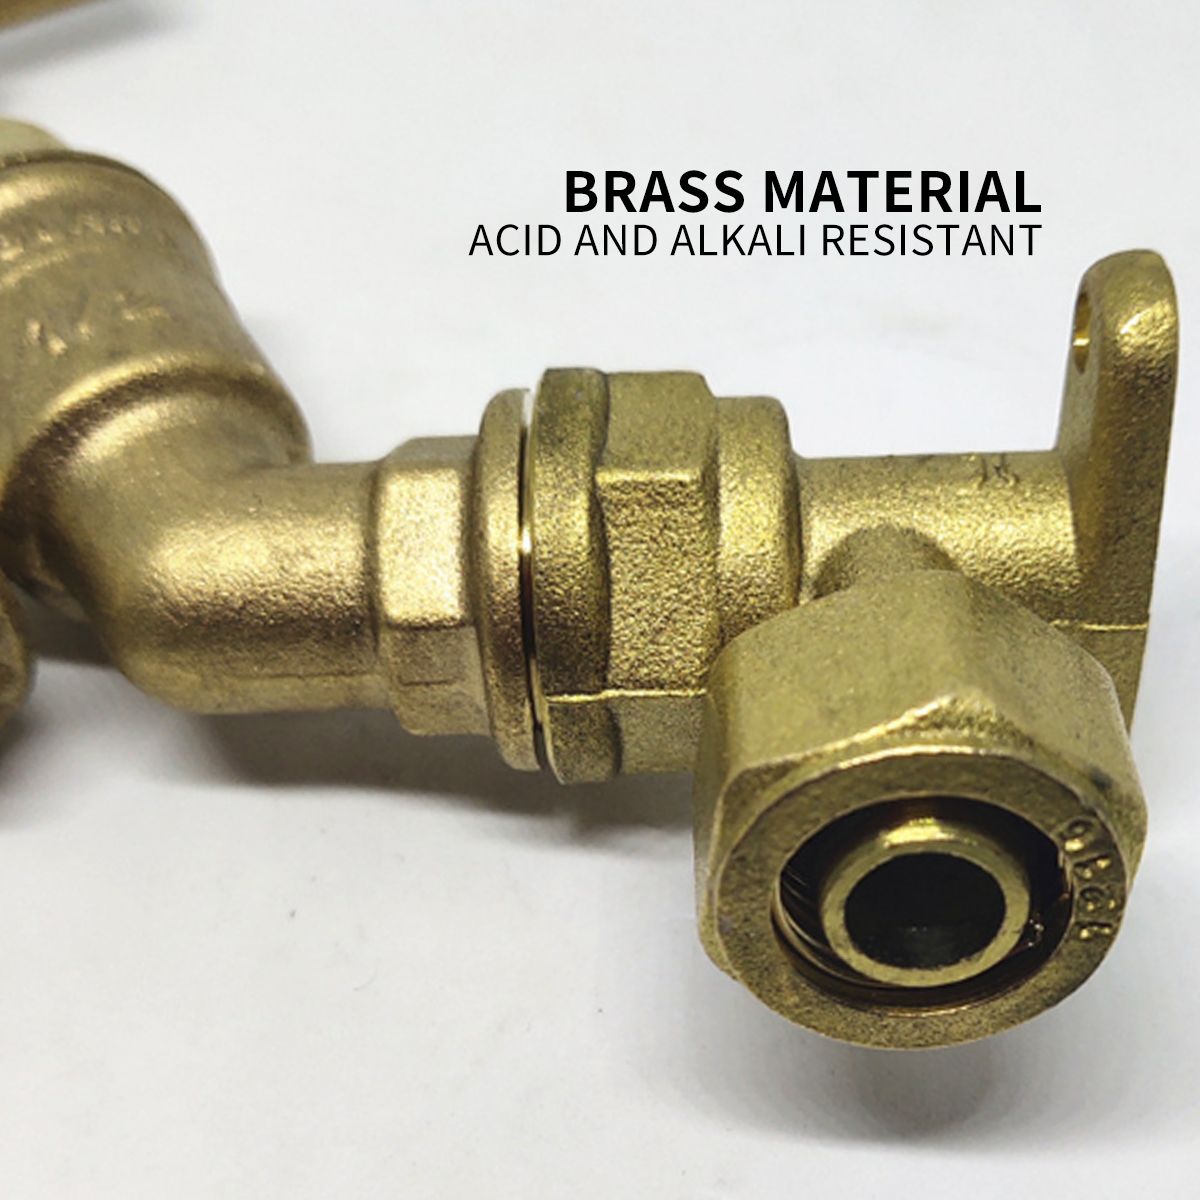 Brass-Faucet-Adapter-Two-Way-Valve-IBC-Tank-Fittings-Accessories-1549356